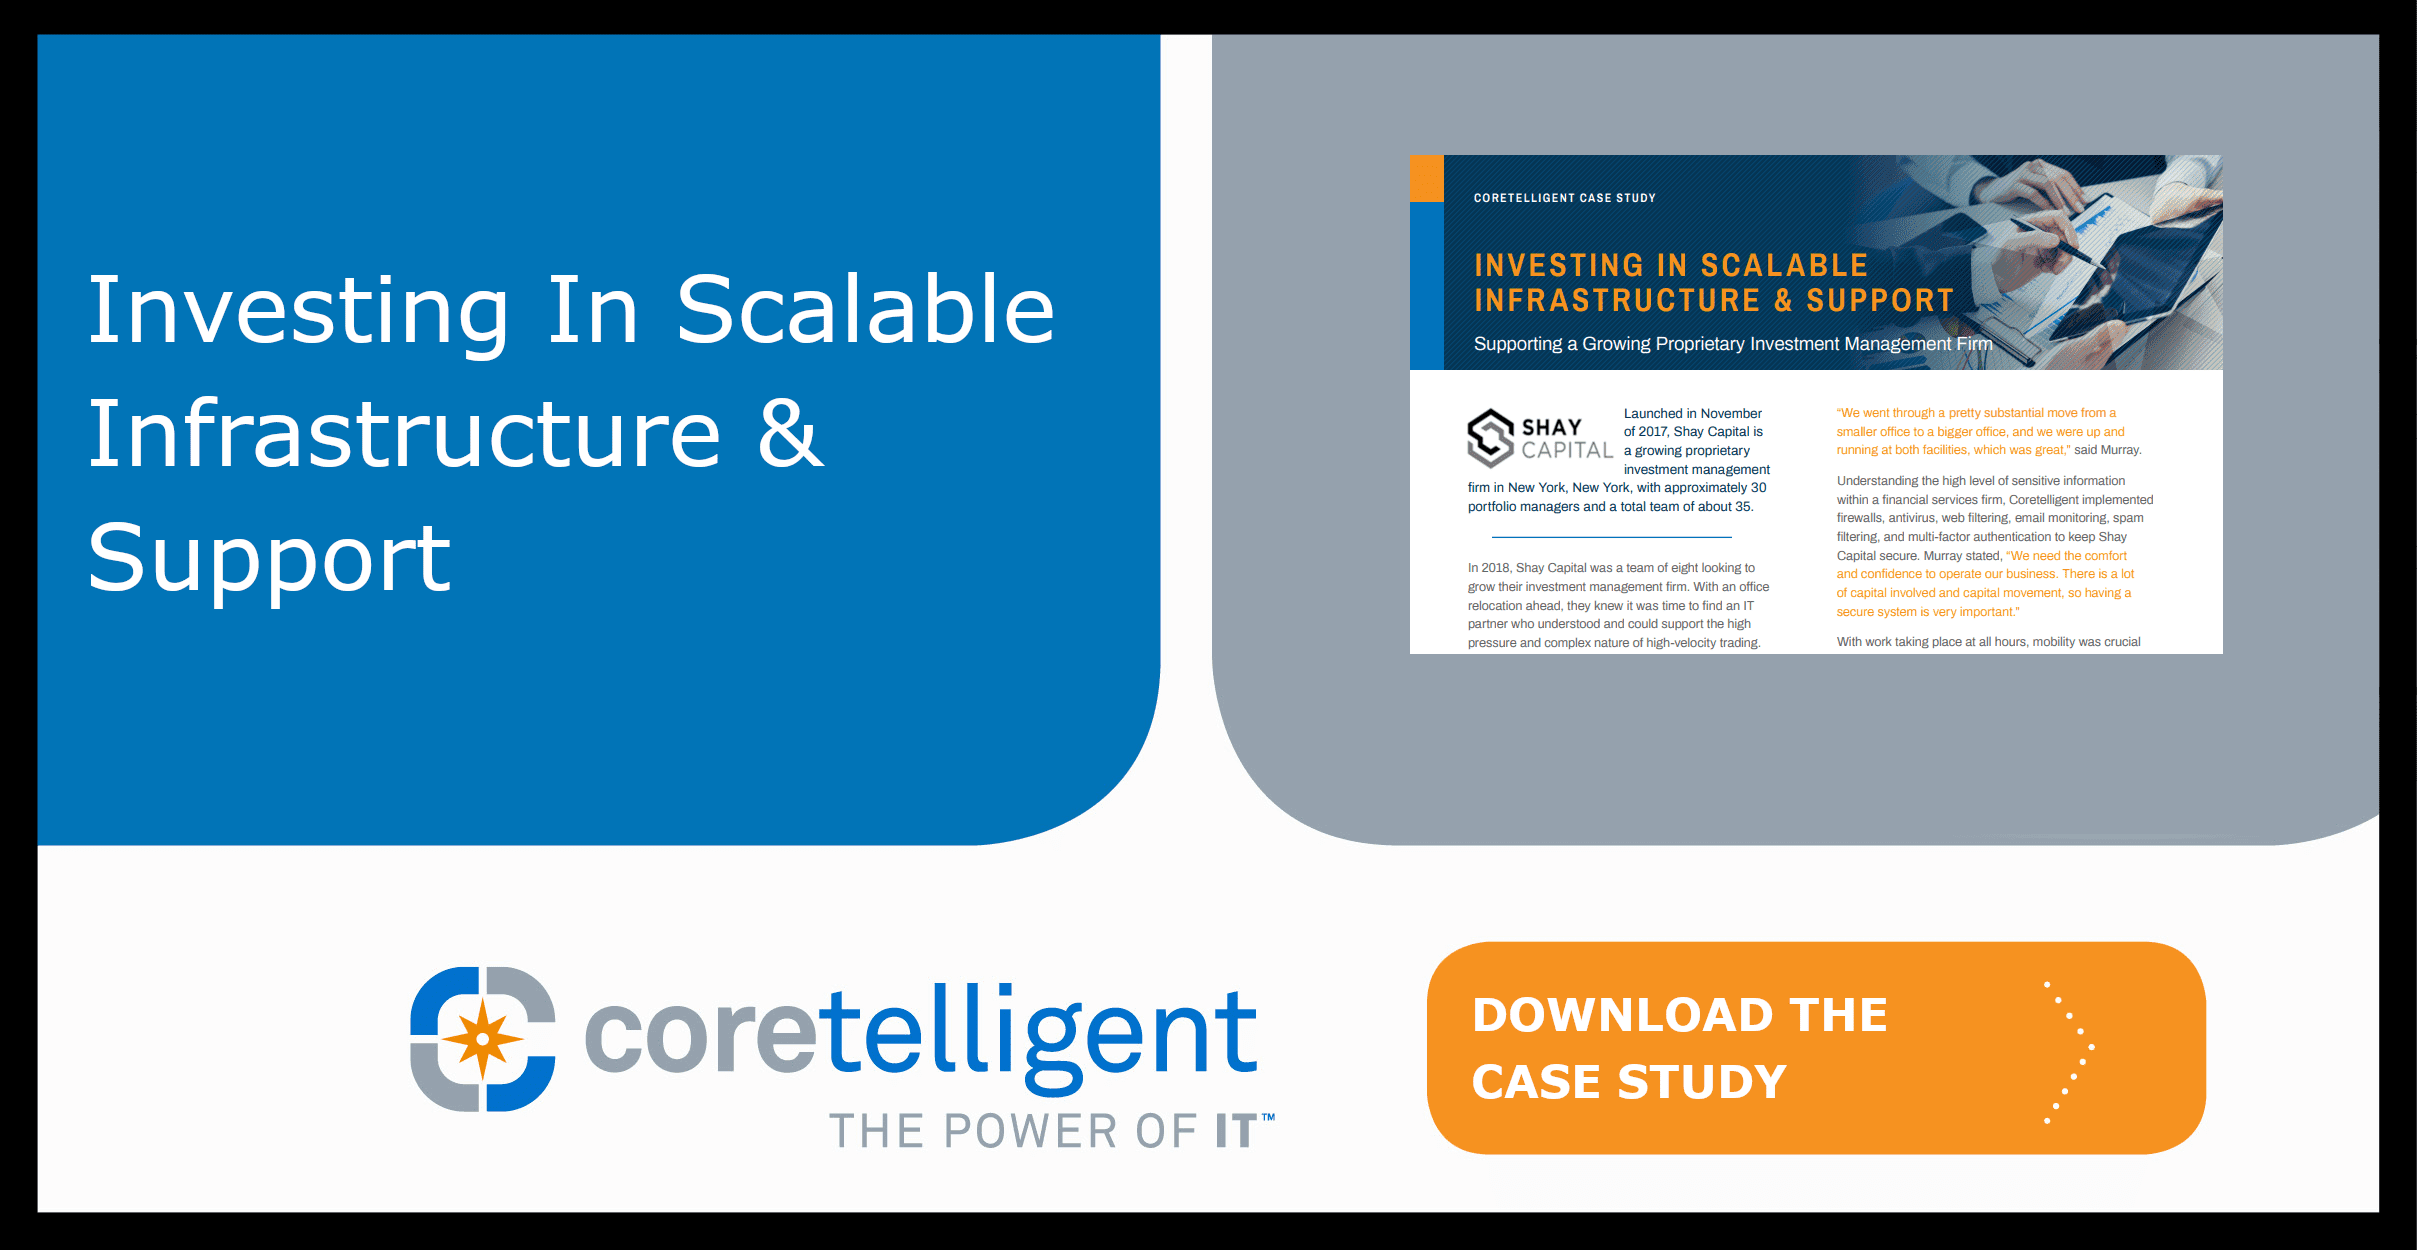 Investing In Scalable Infrastructure & Support Case Study